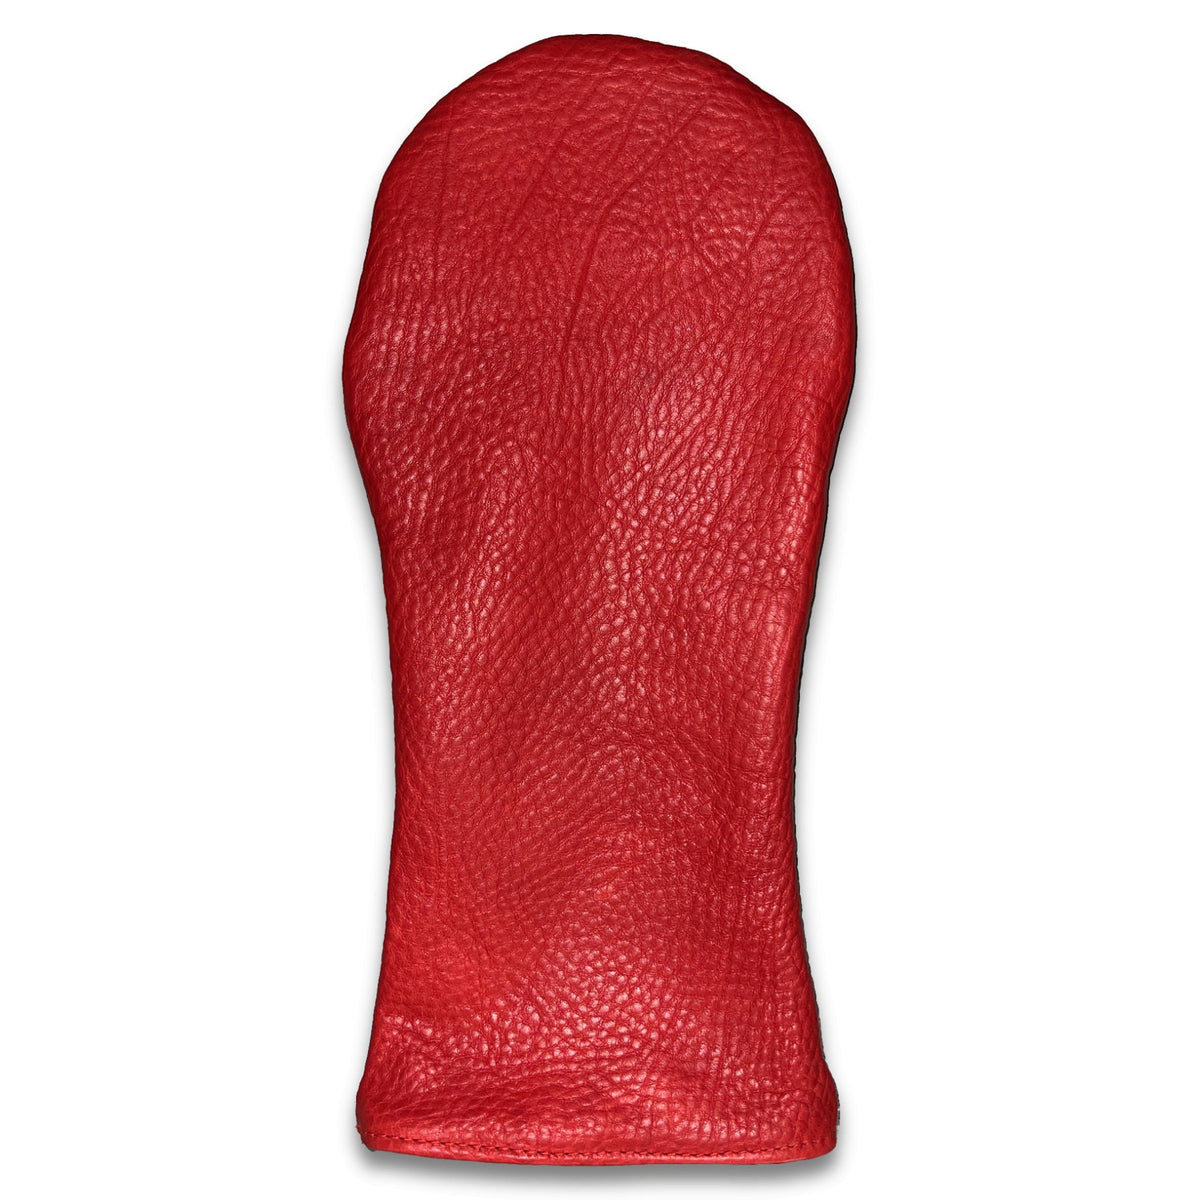 Ranger Leather Head Cover - Red - Driver -